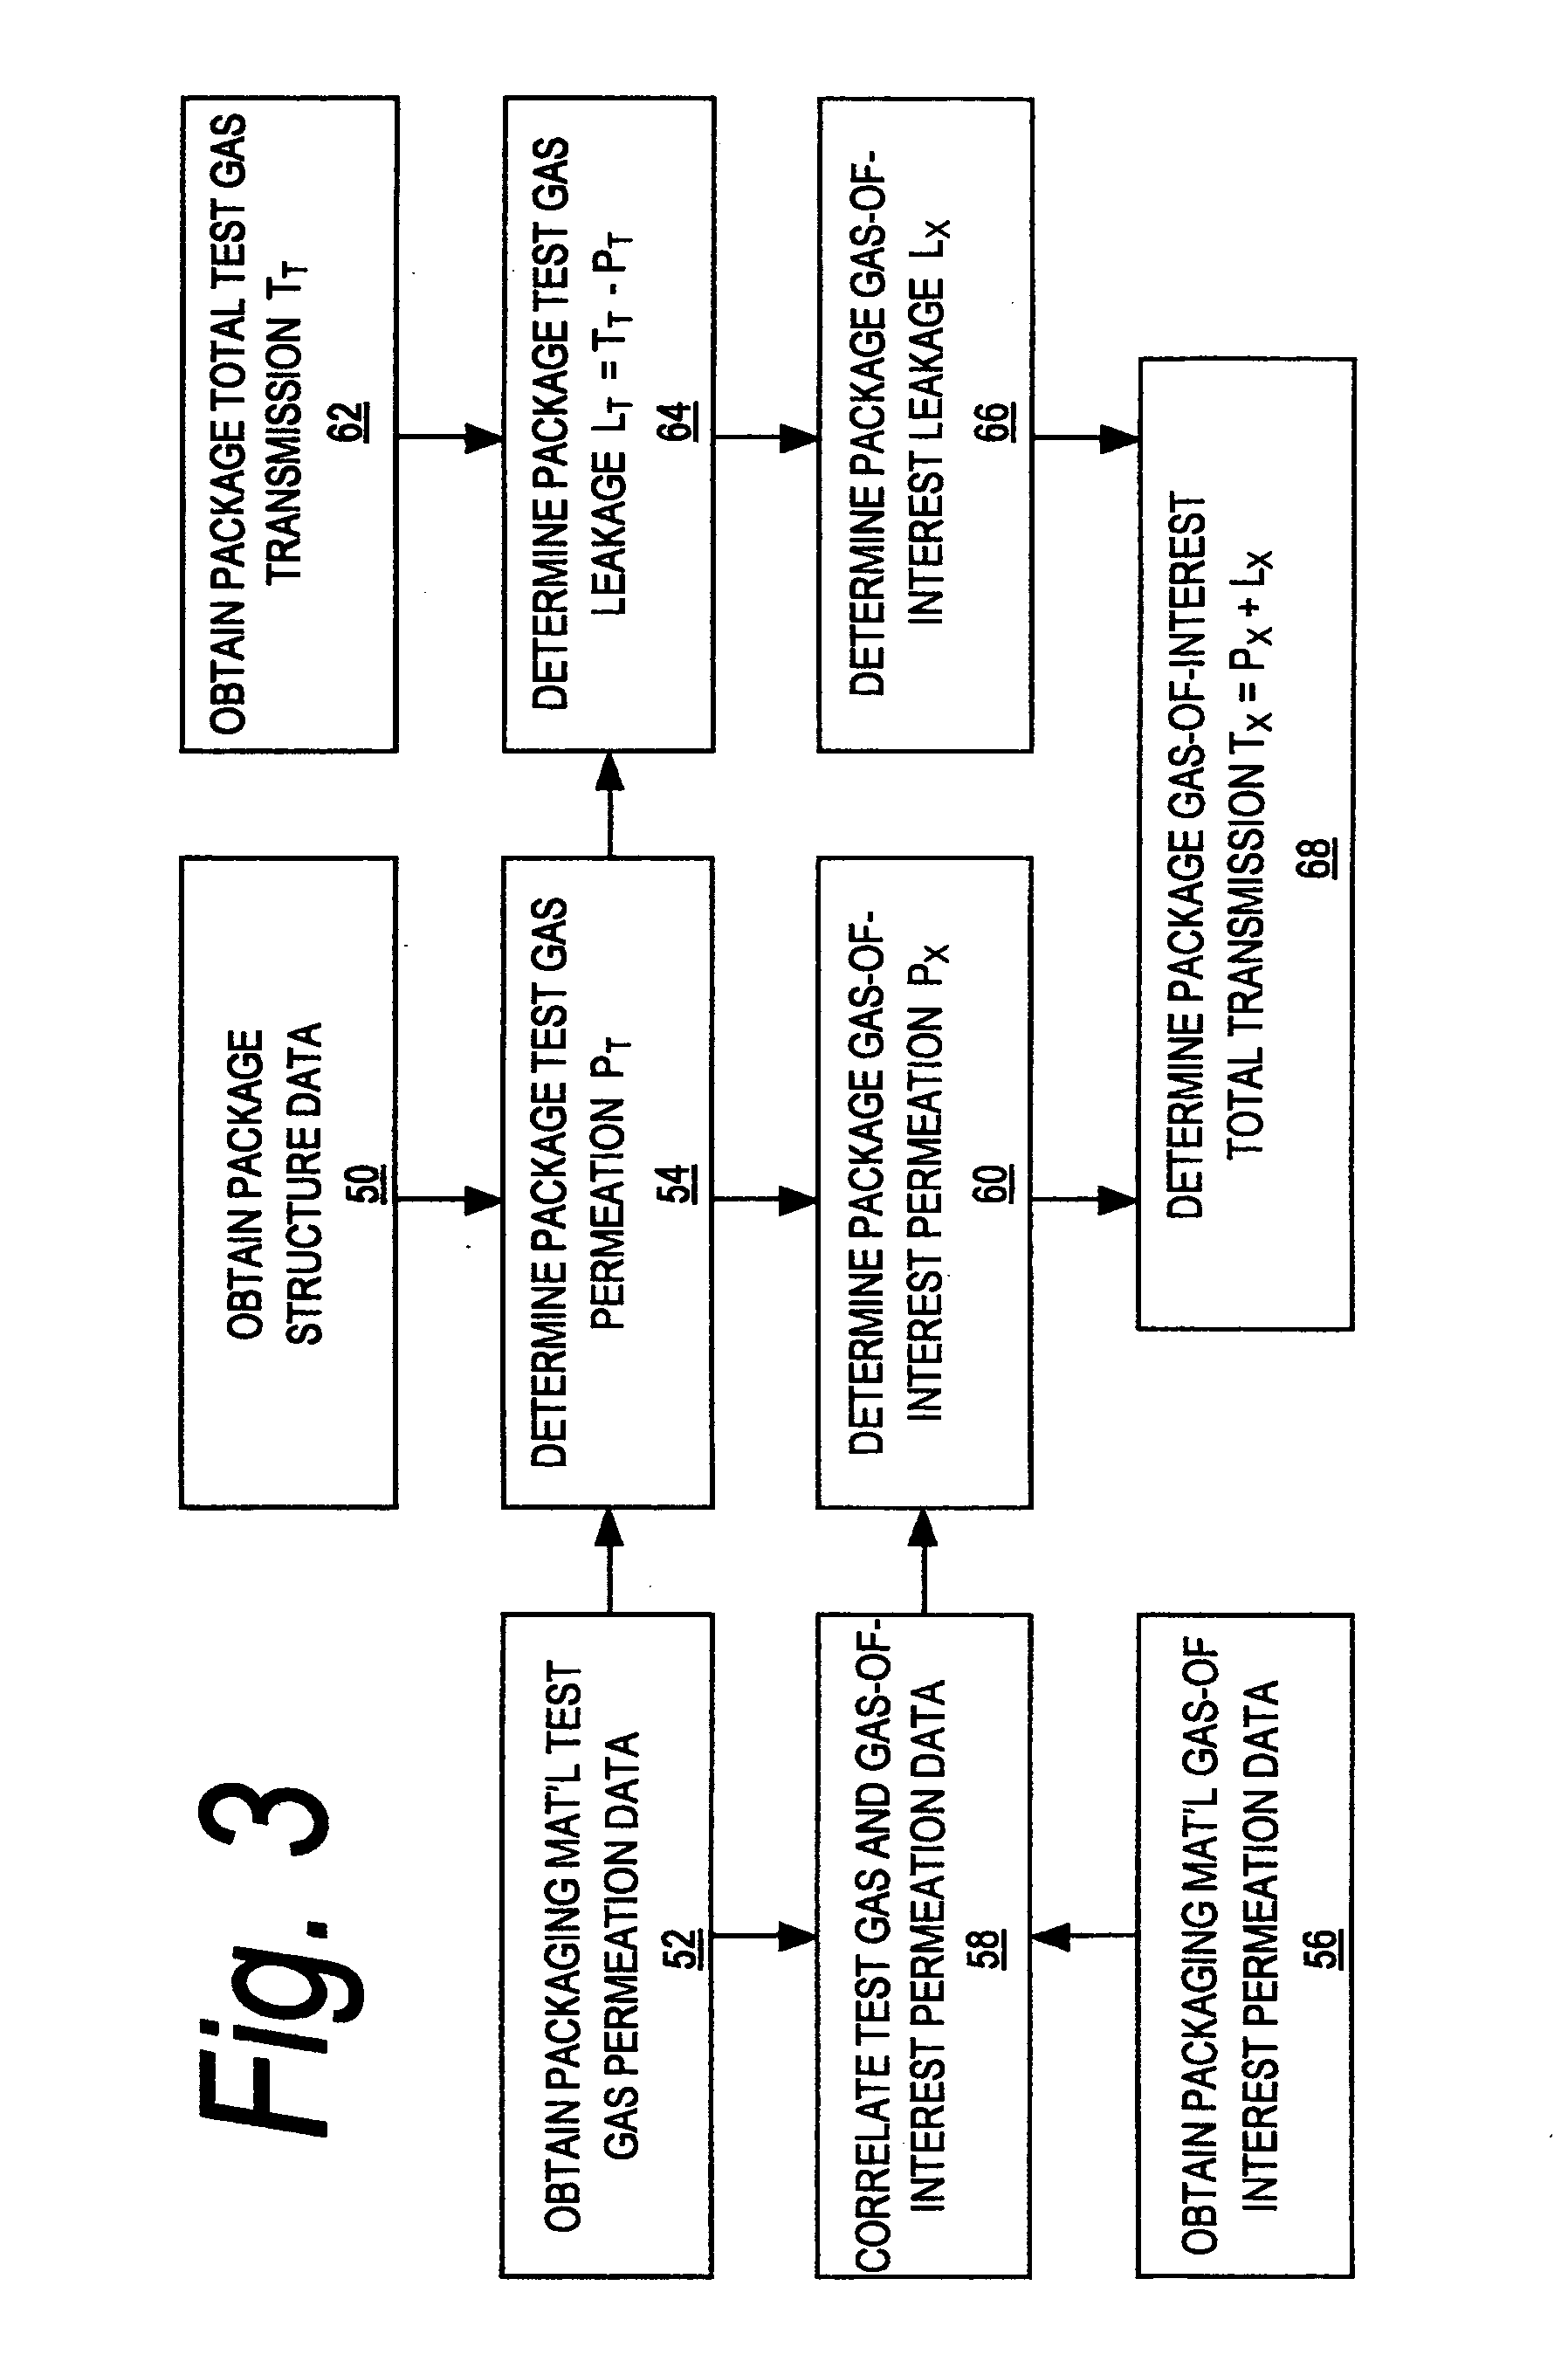 System for determing the integrity of a package or packaging material based on its transmission of a test gas